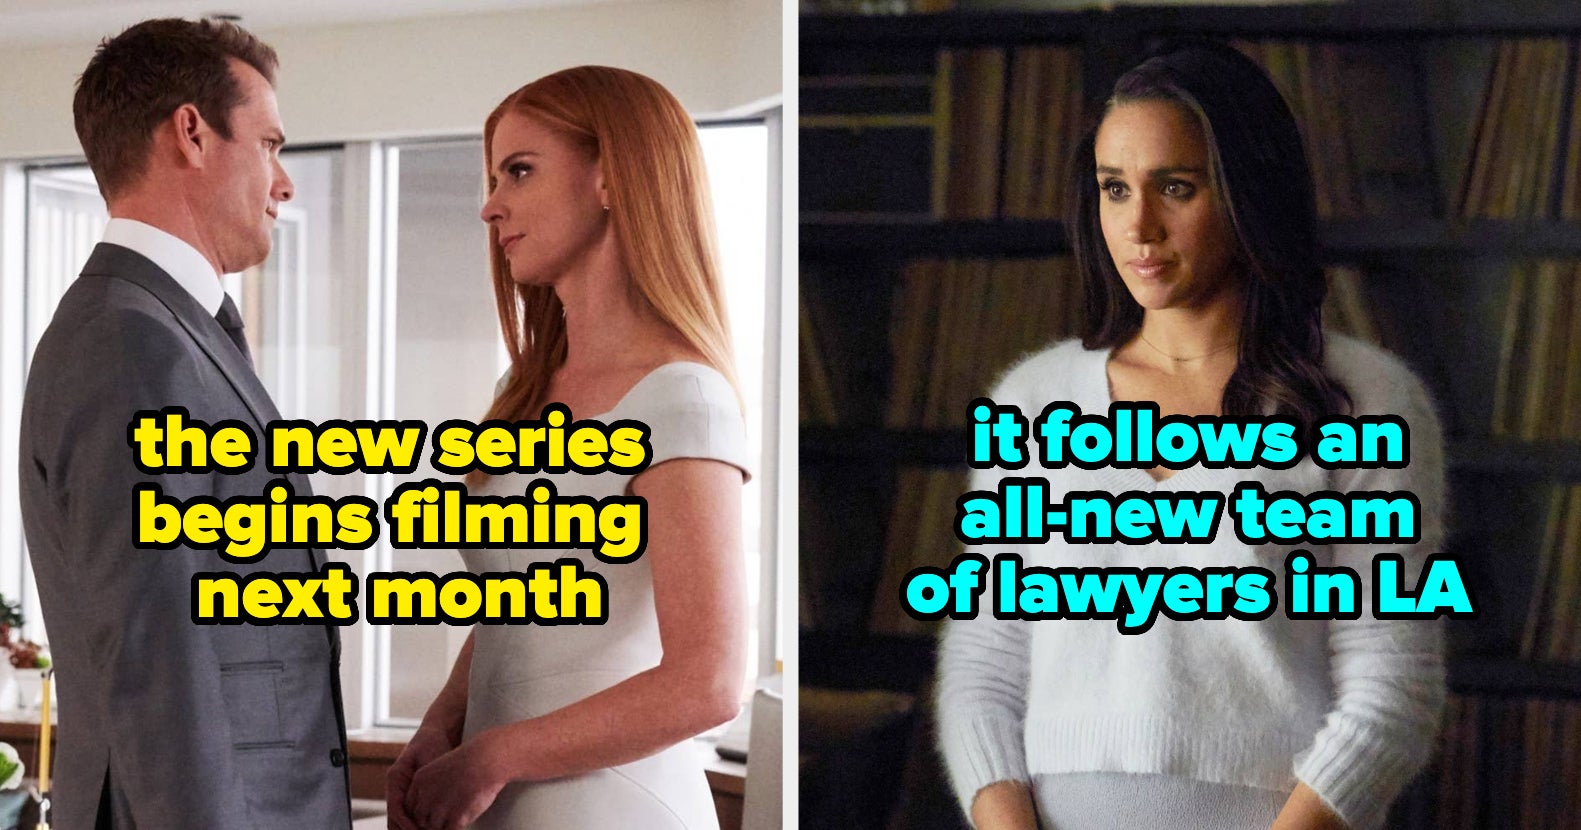 Here's Everything We Know So Far About The New "Suits" Spinoff "Suits: L.A."